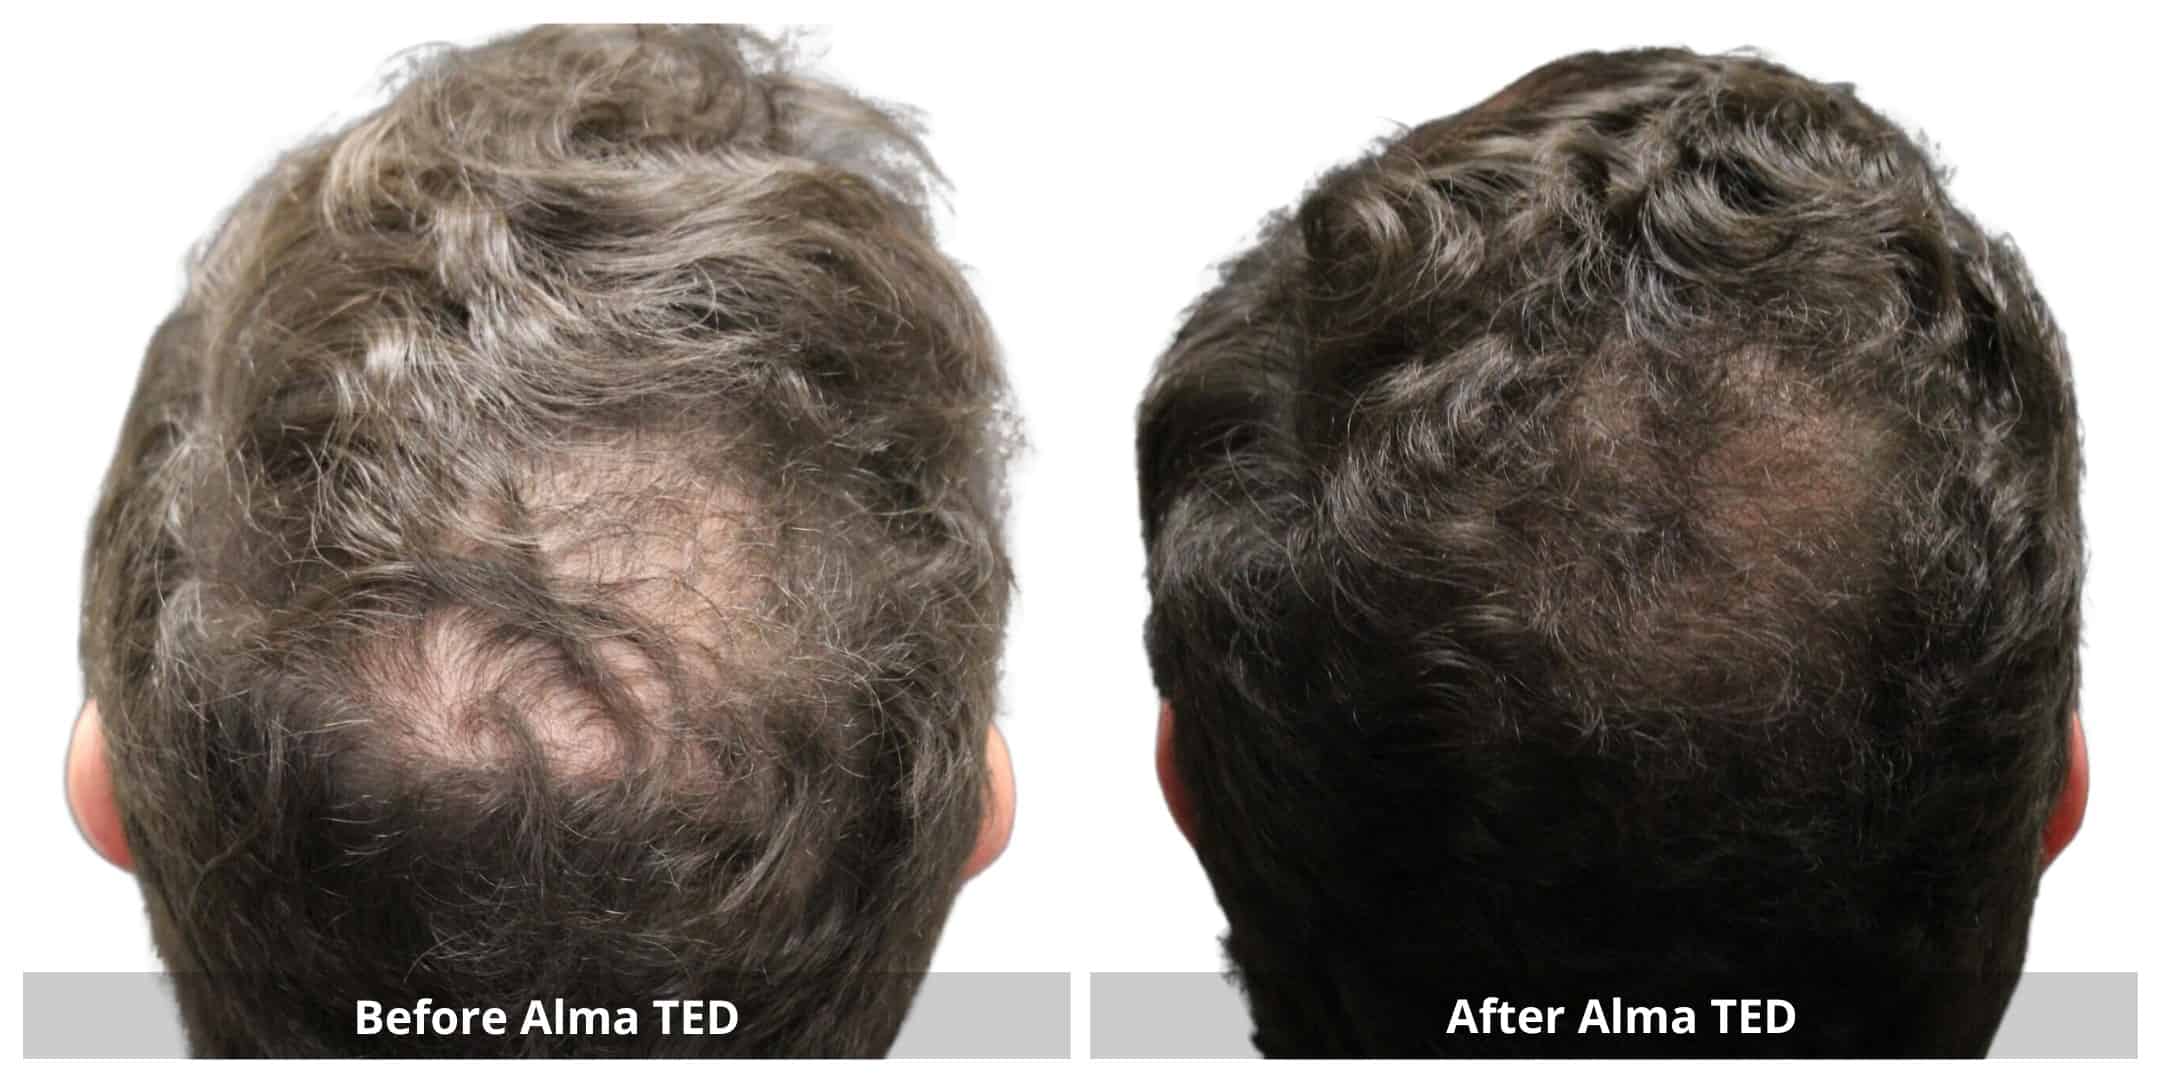 Alma ted hair restoration before and after photo 5